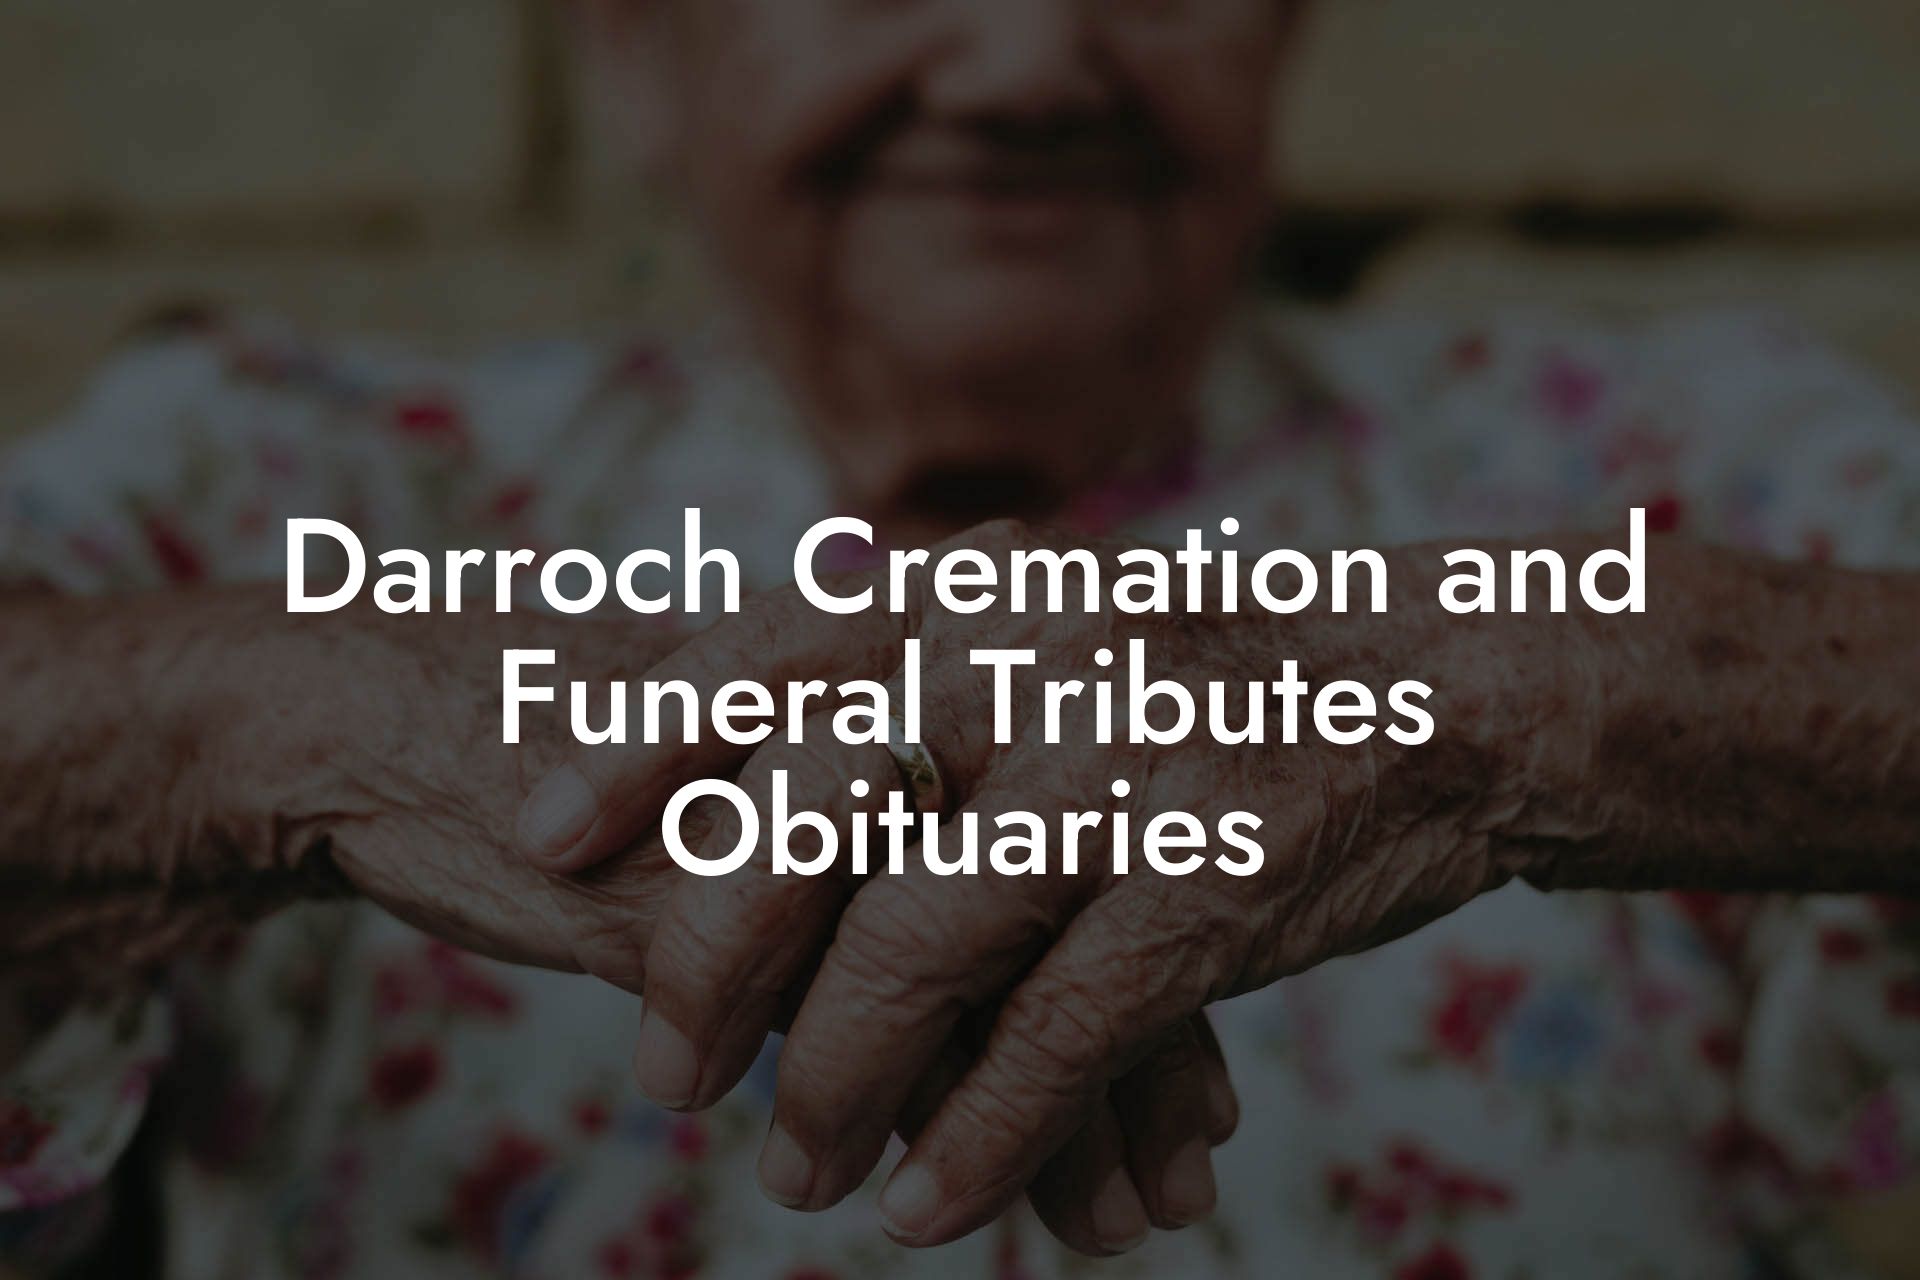 Darroch Cremation and Funeral Tributes Obituaries